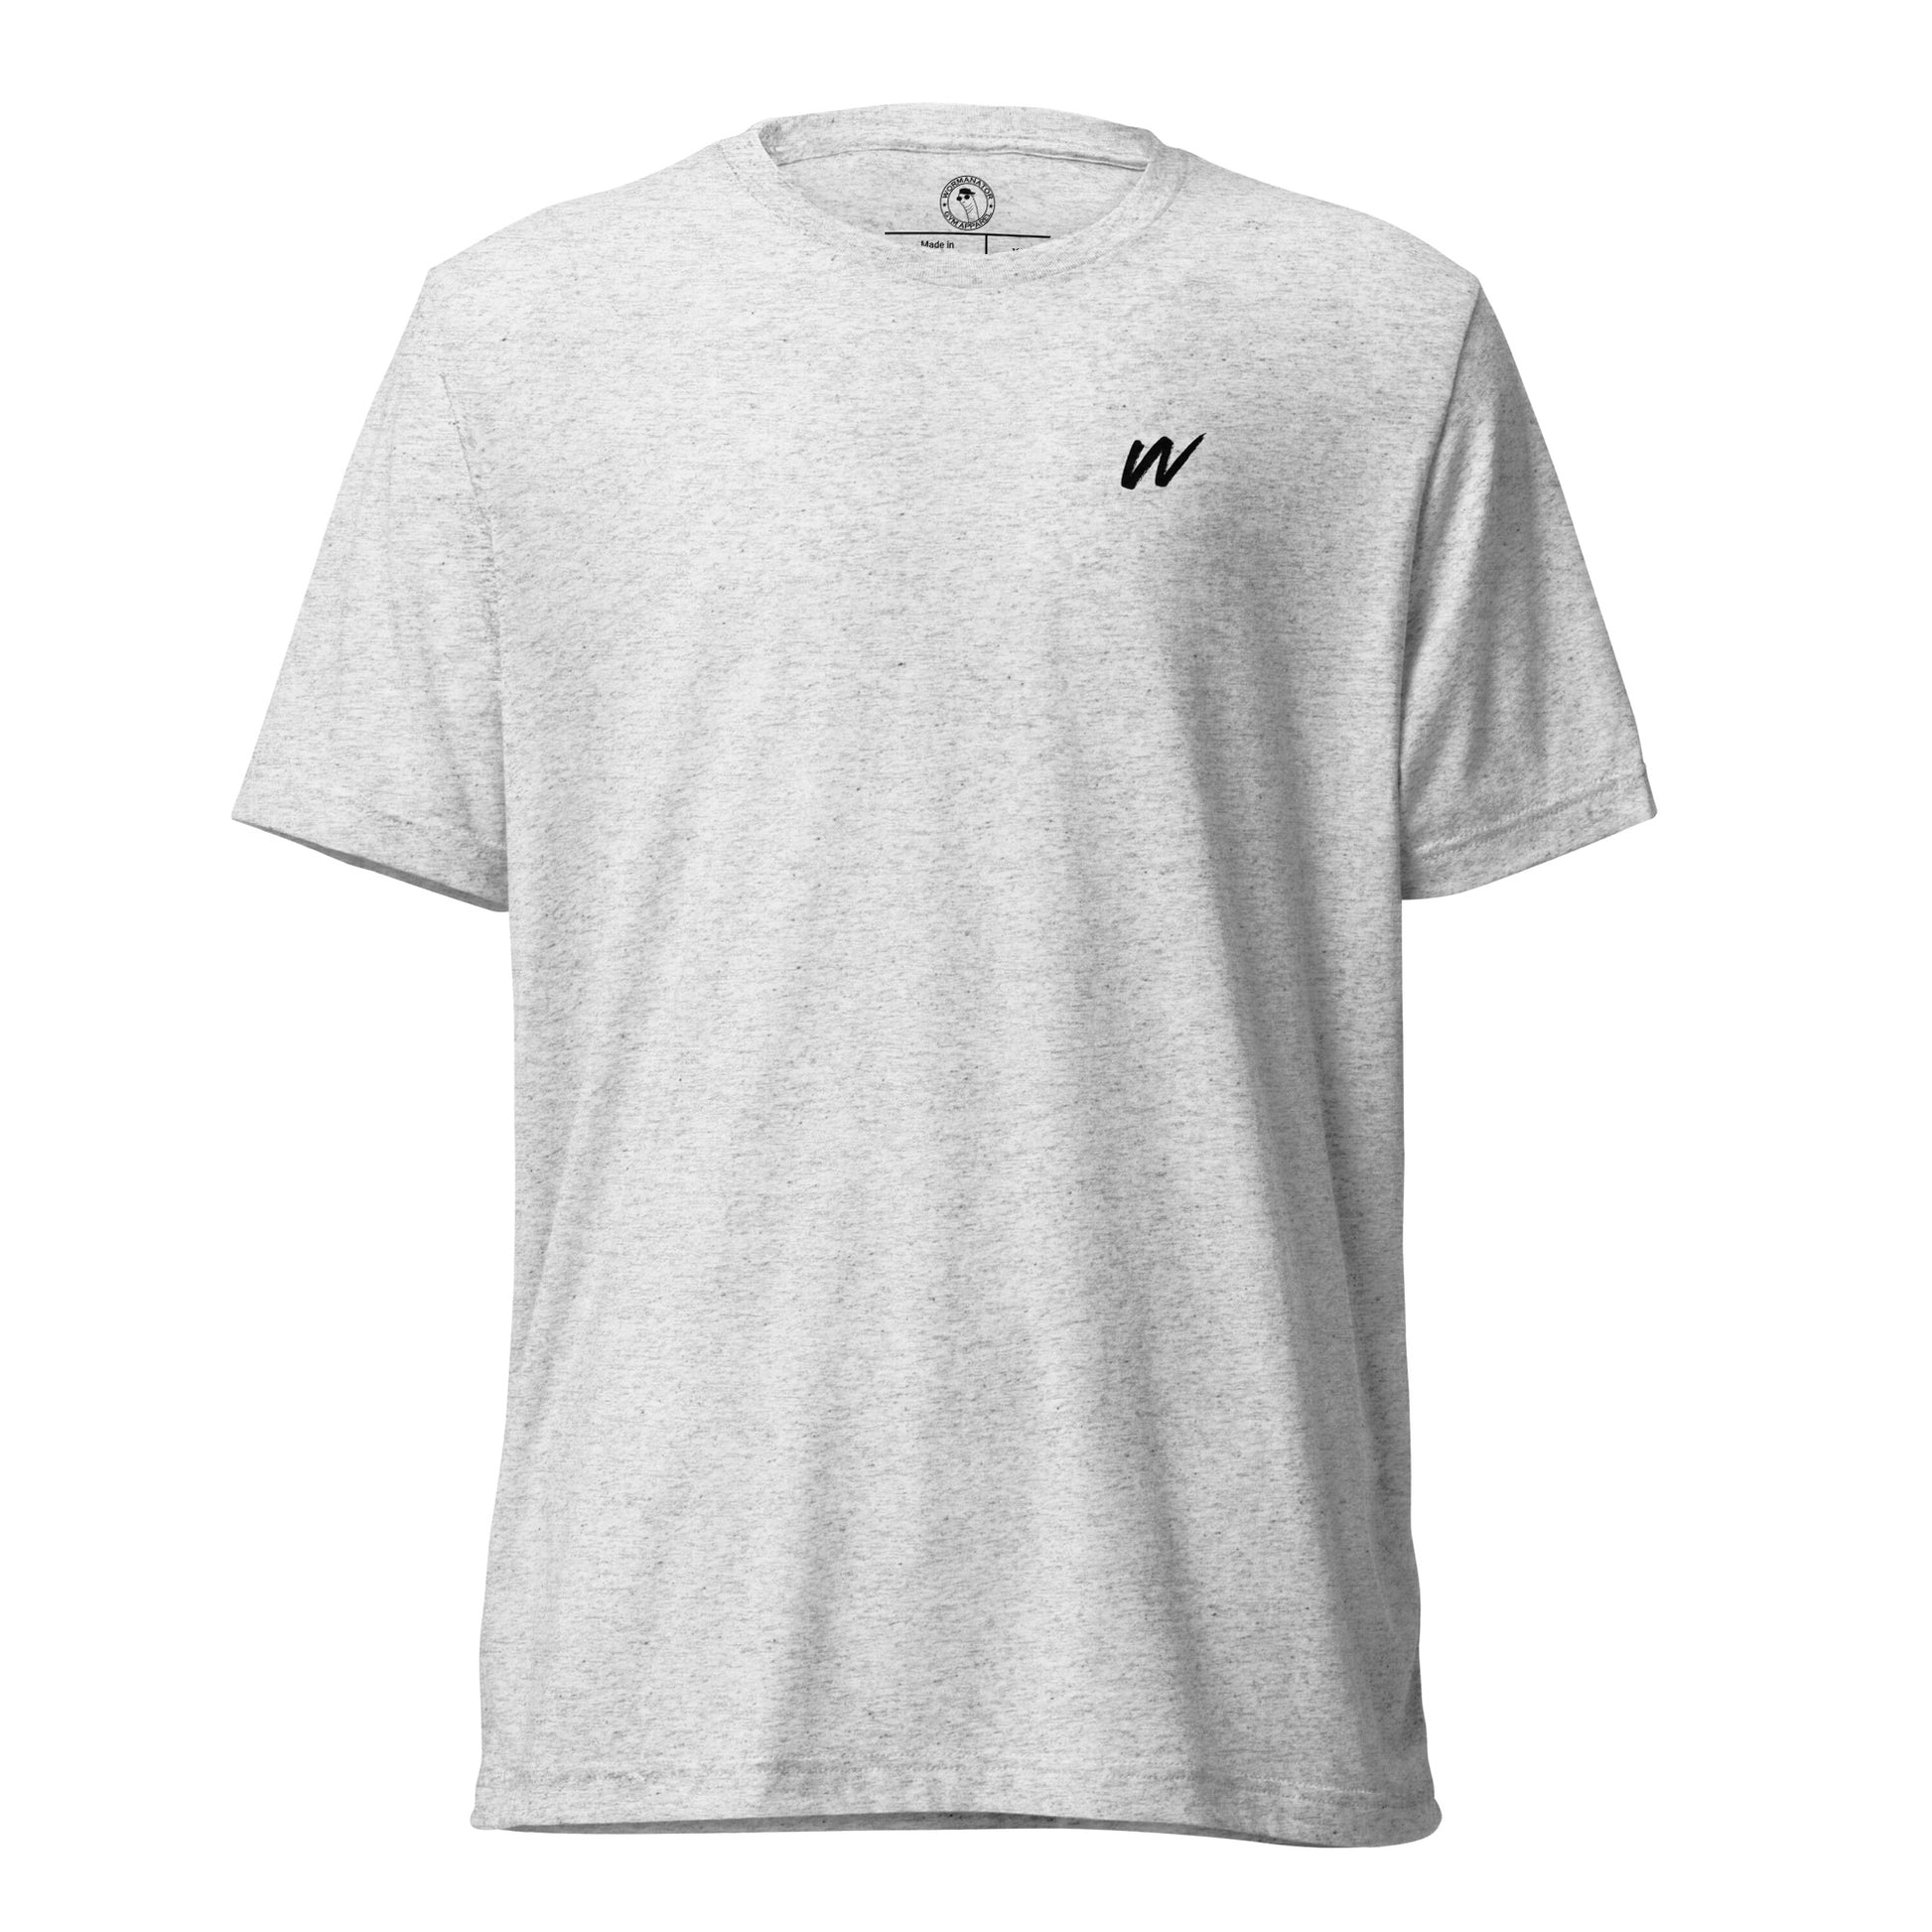 Win the Day T-Shirt in White Fleck